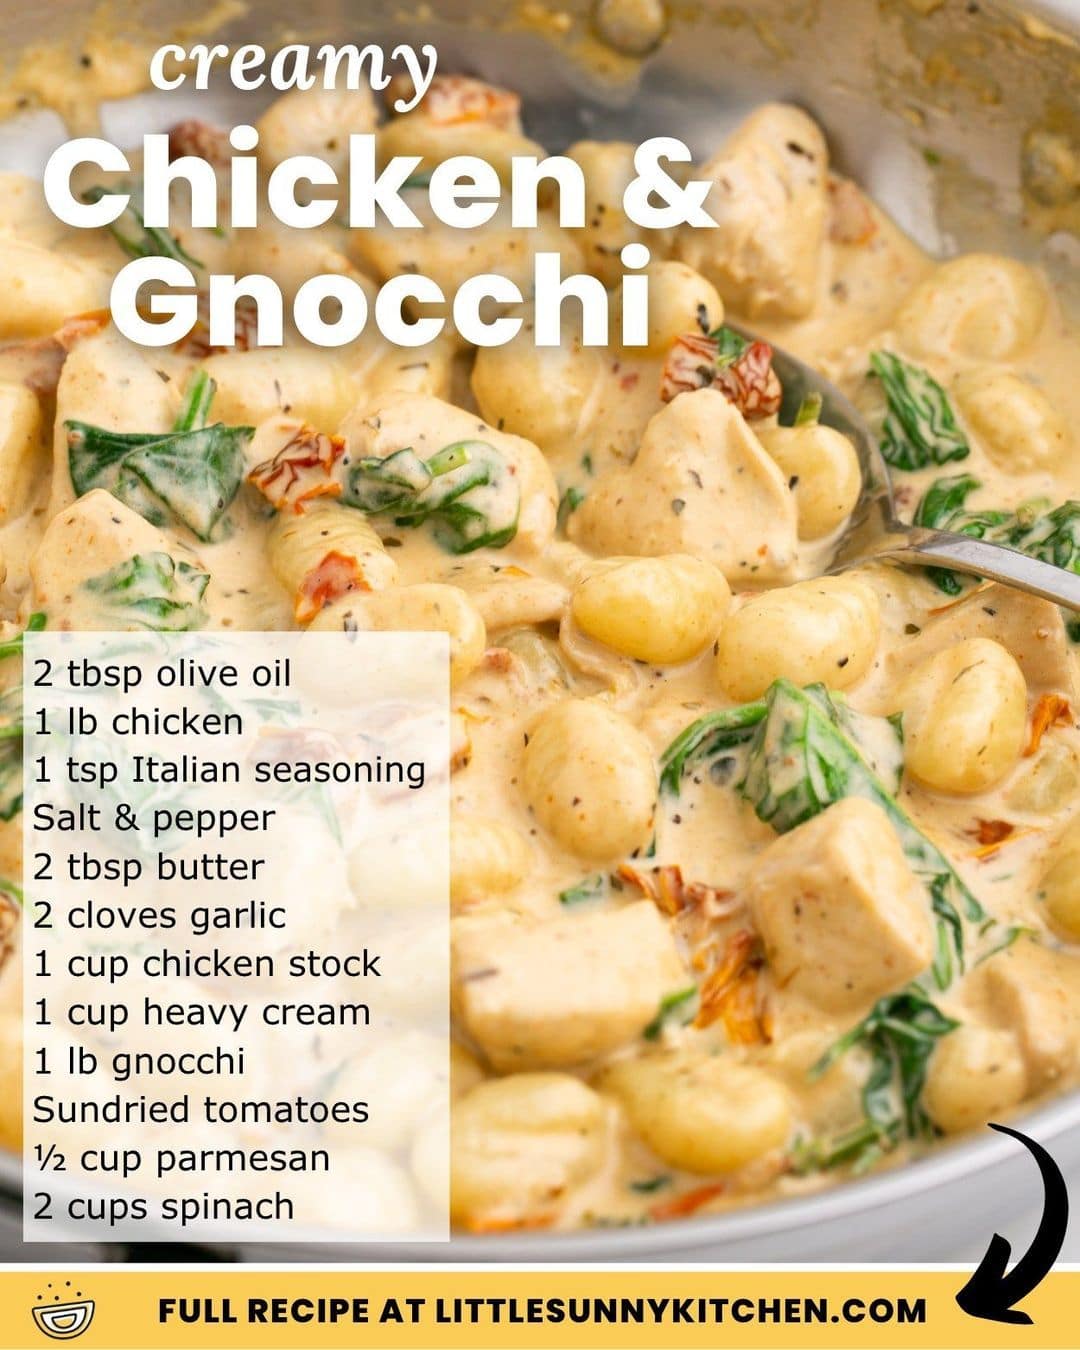 An appetizing dish of creamy chicken and gnocchi, ideal for busy families, is shown with ingredients listed beside it and the URL for the full recipe at the bottom. The gnocchi is